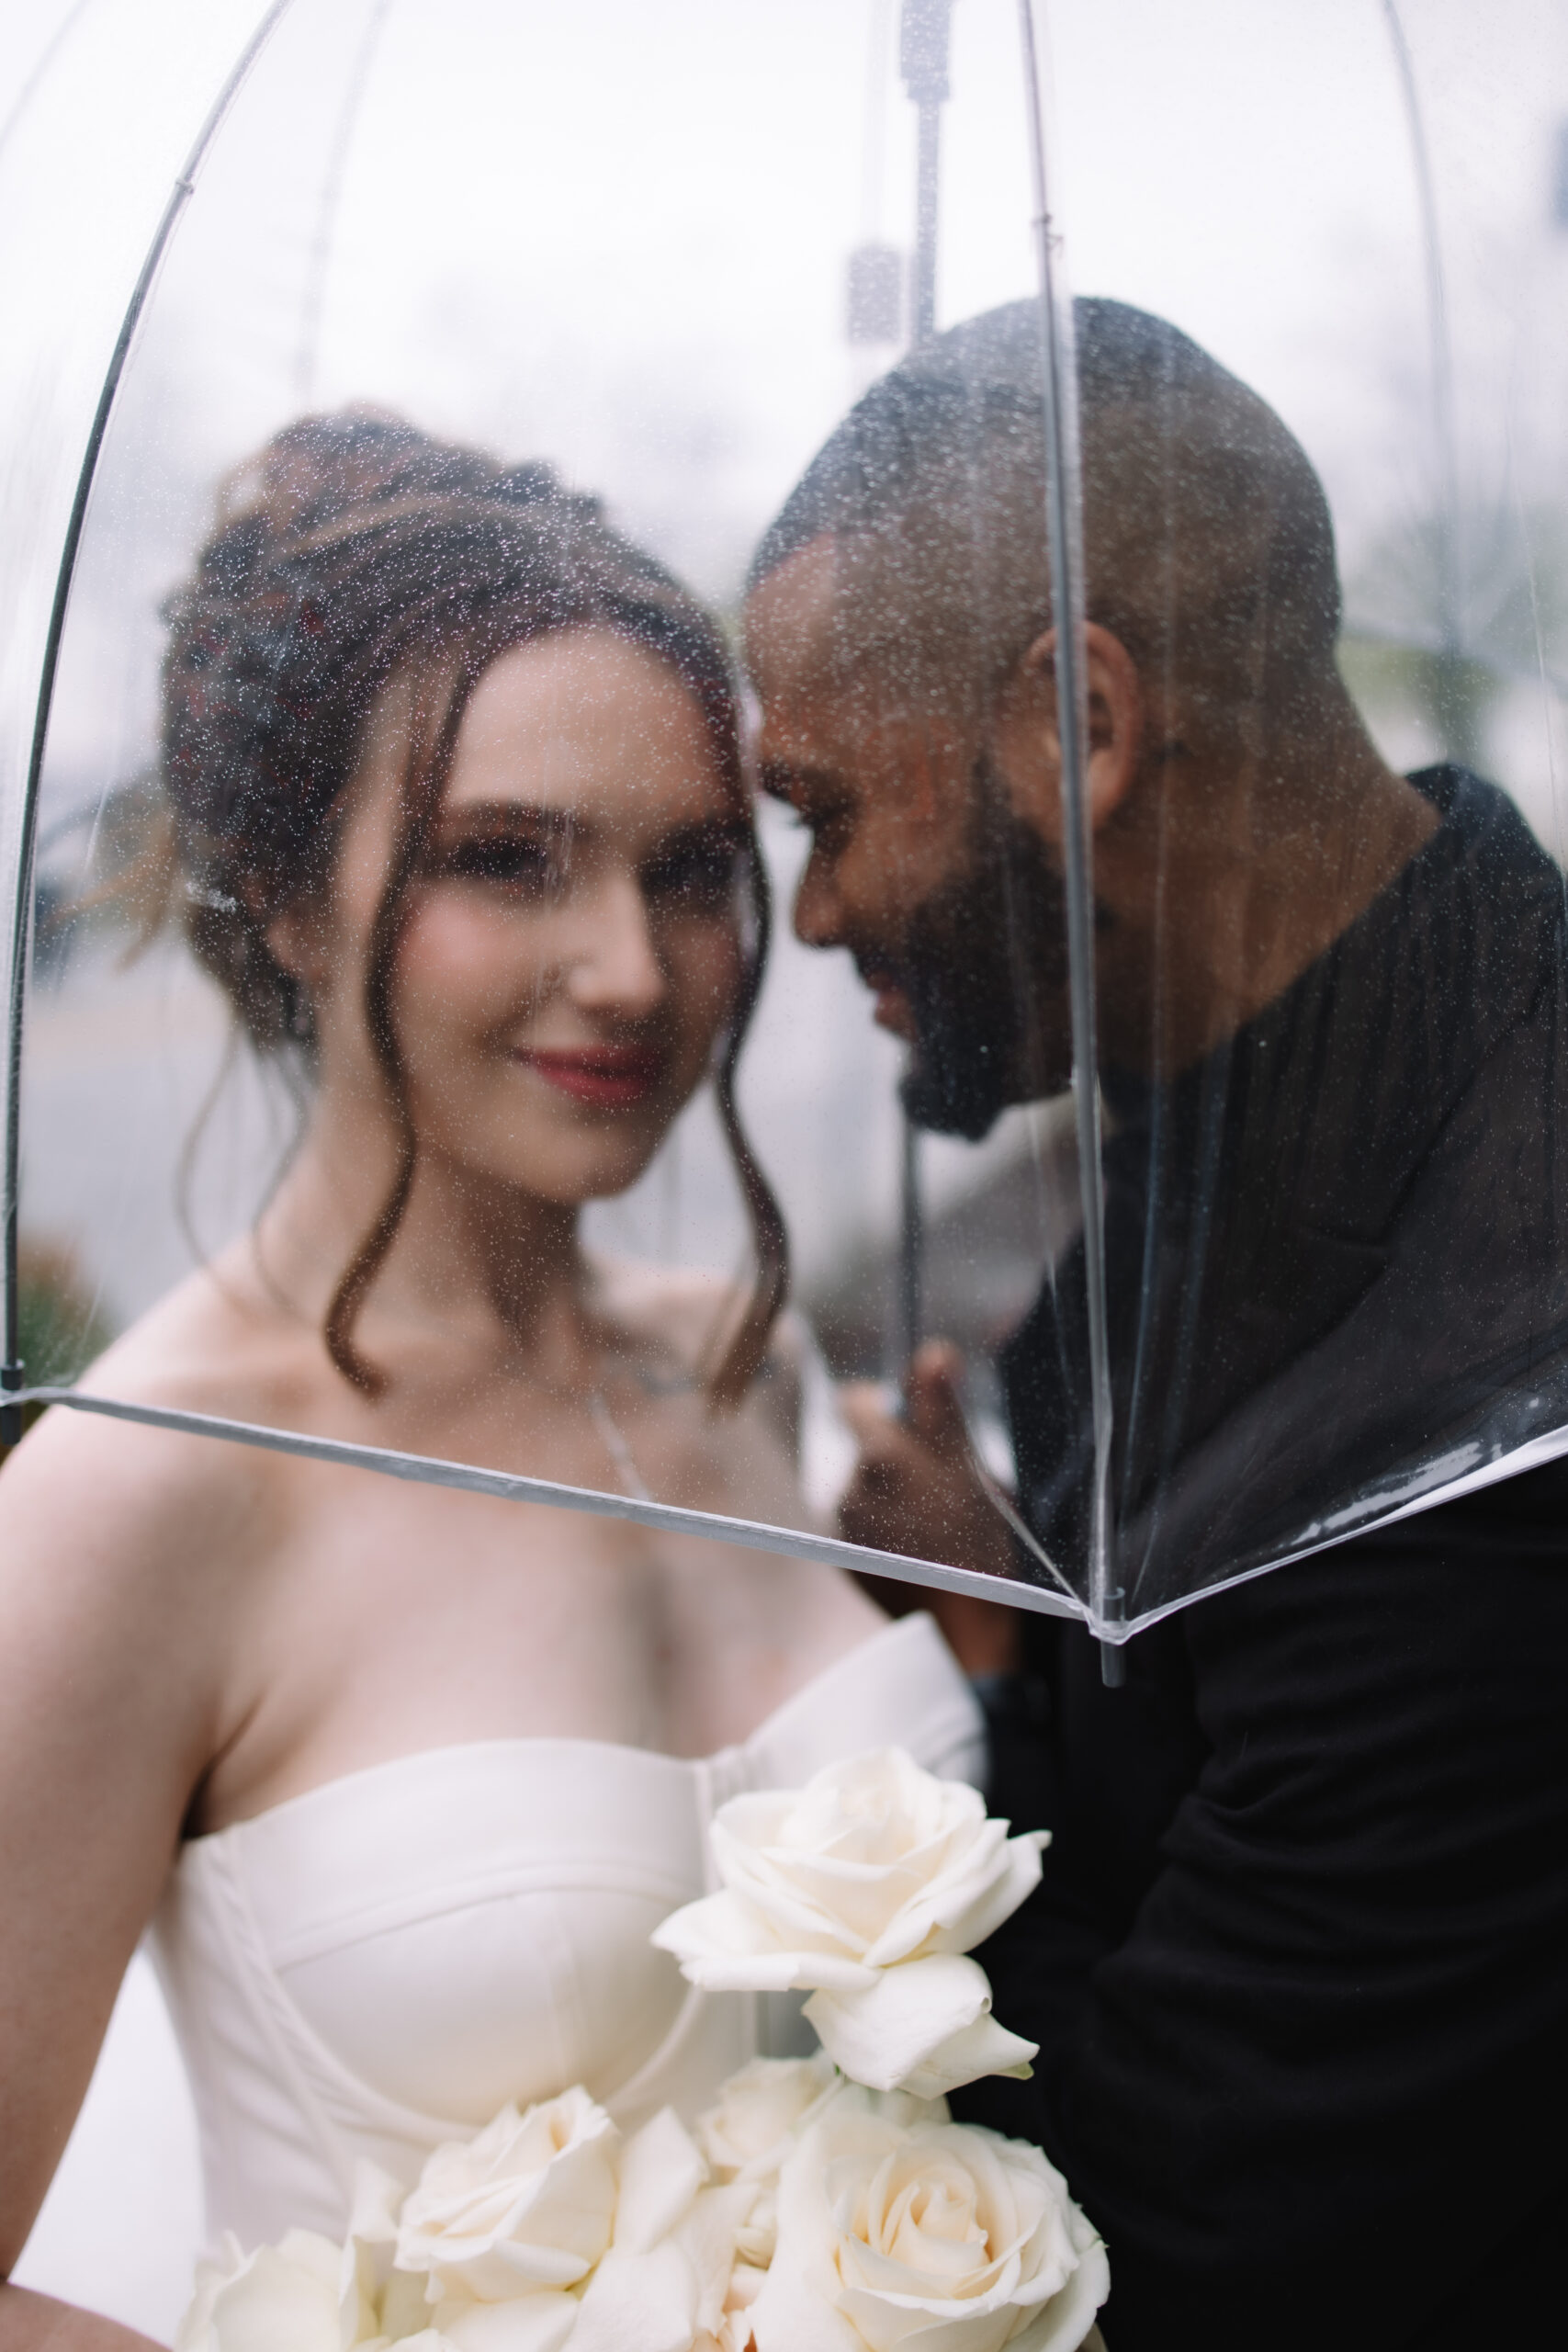 A bride and groom stand under a clear umbrella on a rainy day, sharing a close moment. The bride holds white roses and wears a strapless dress.